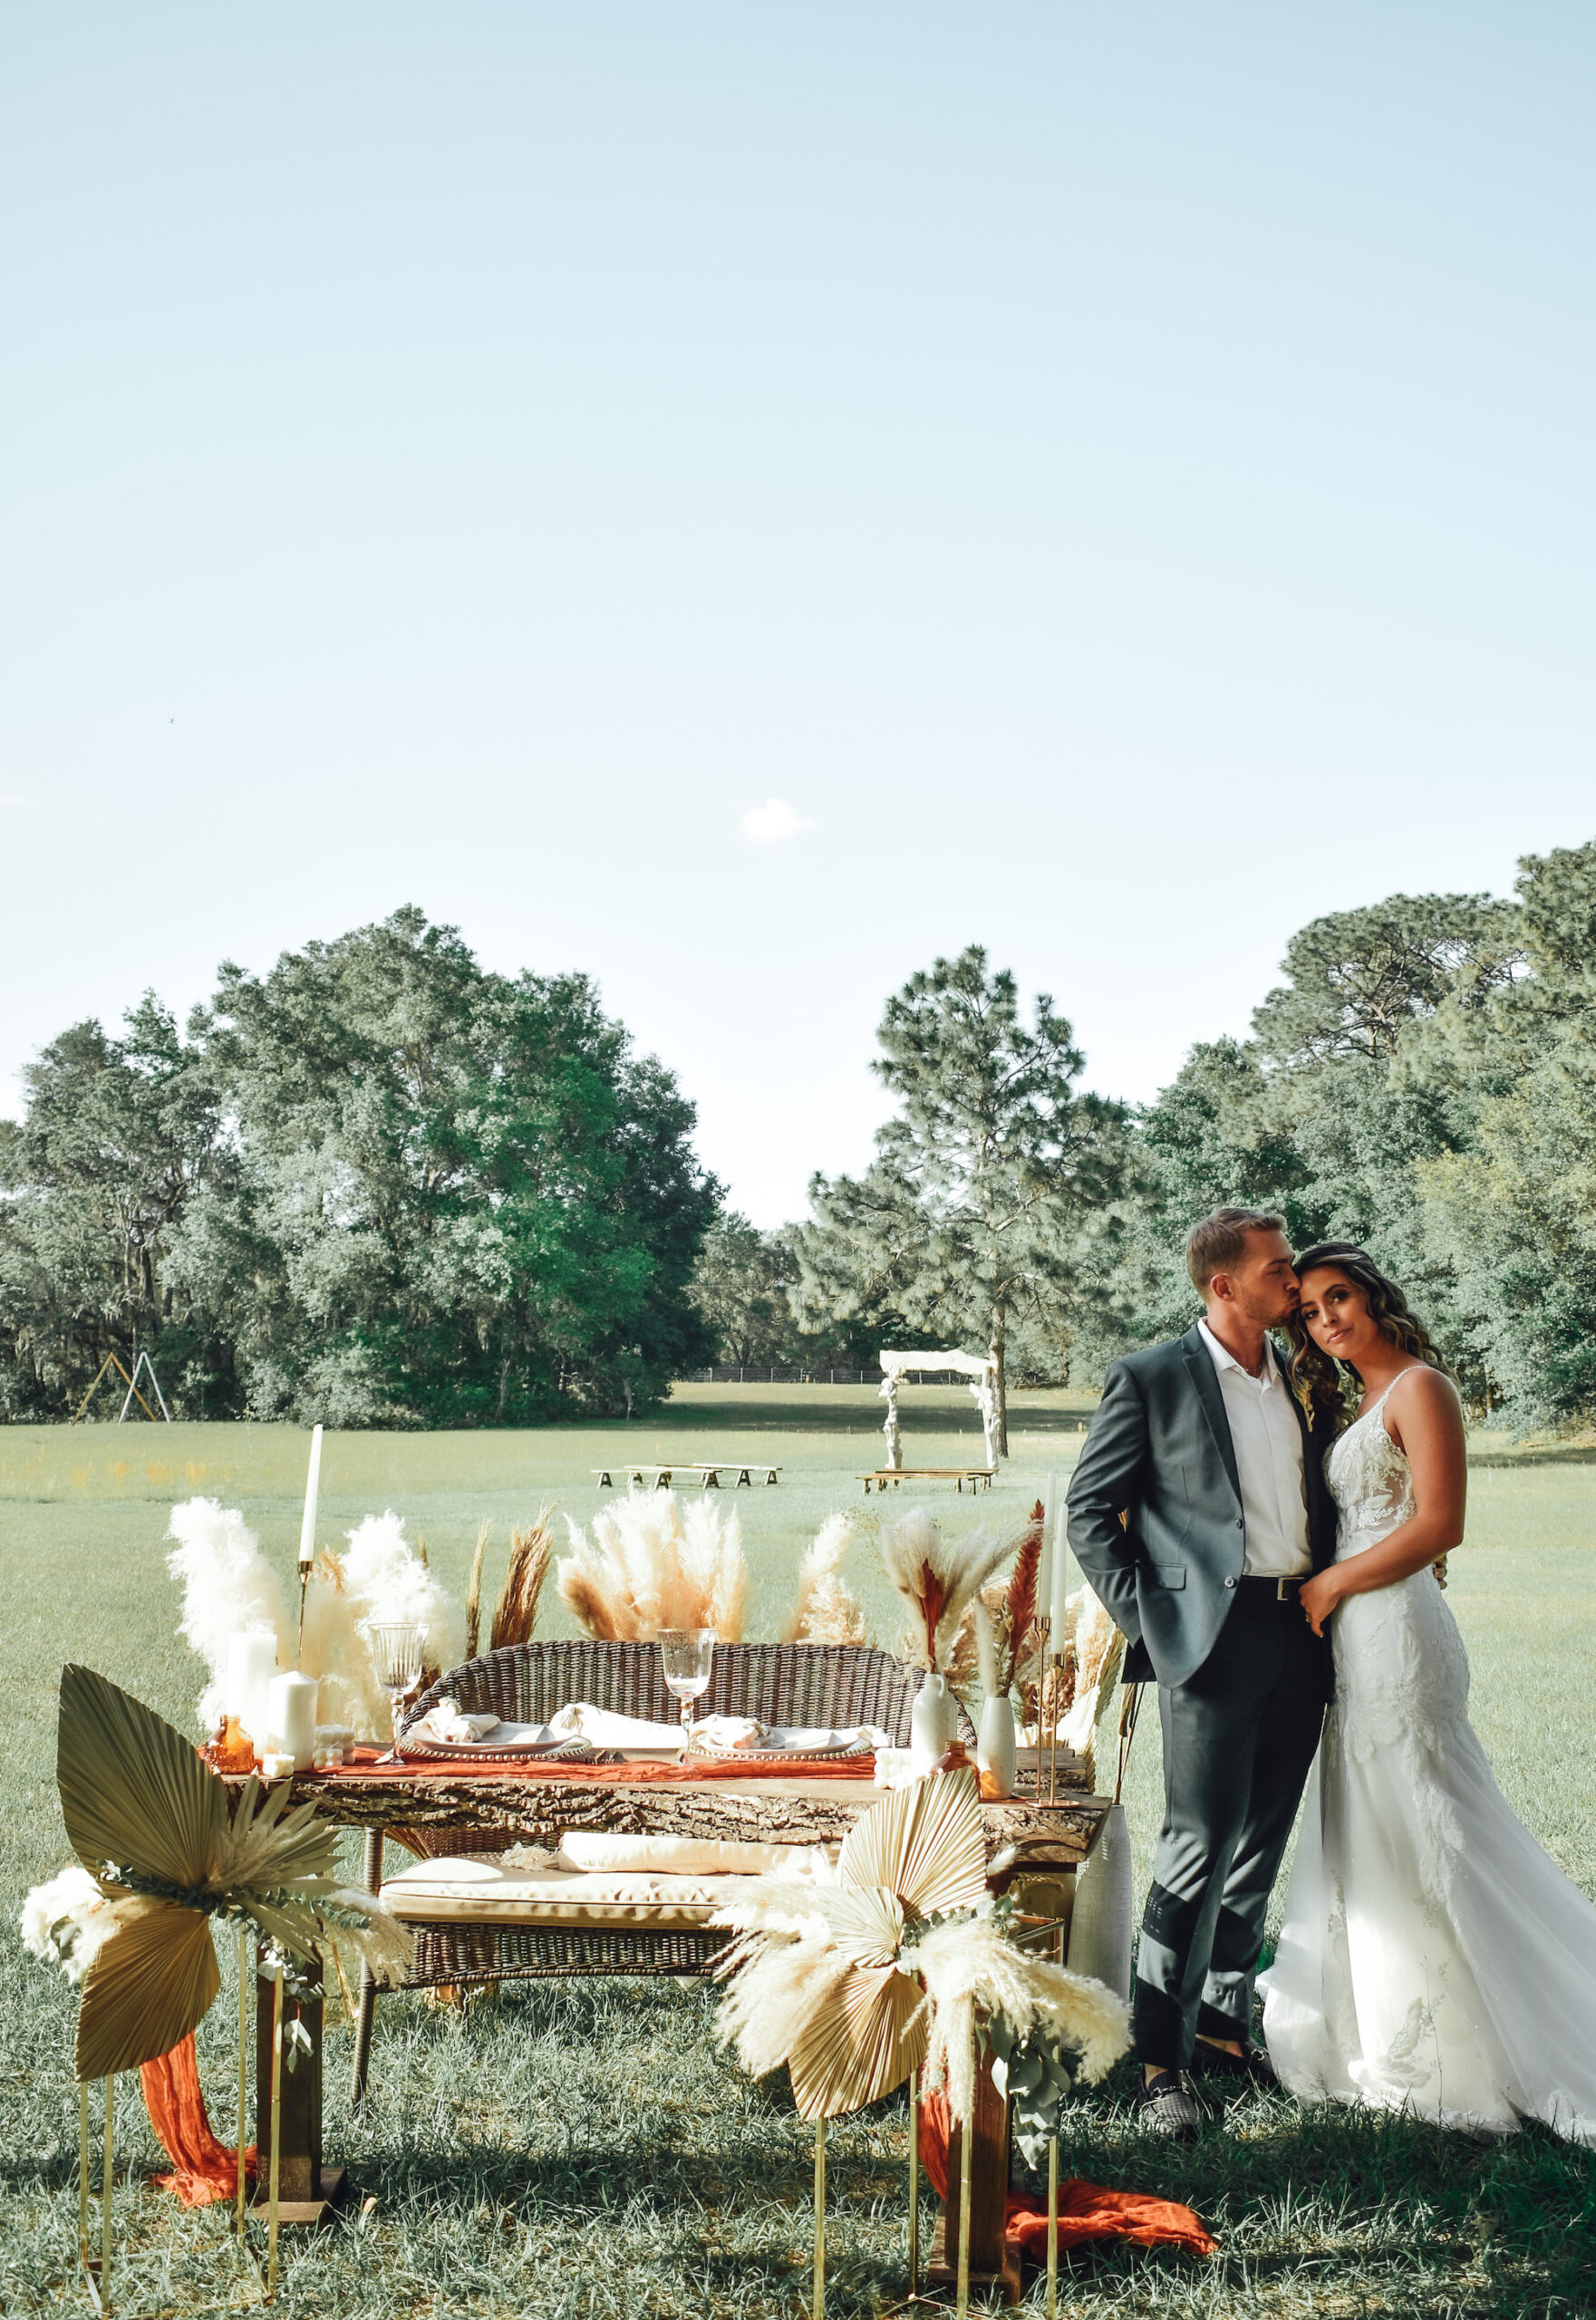 Boho Wedding Reception Ideas | Natural Florals Sweetheart Table with Pampas and Dried Leaves Wedding Decor | Tampa Bay Wedding Planner Kelci Leigh Events